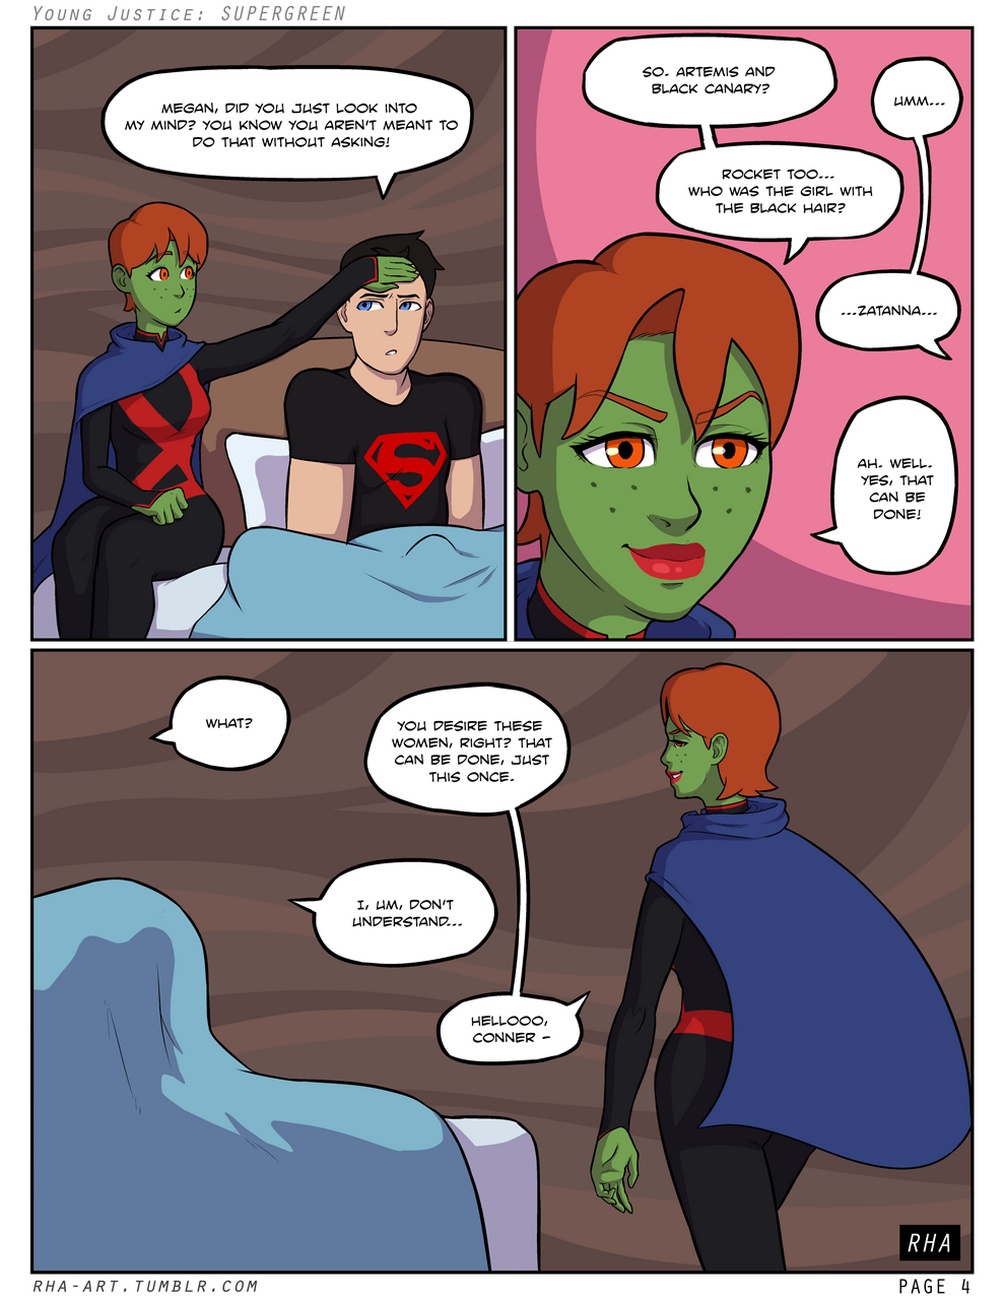 Young Justice - Supergreen